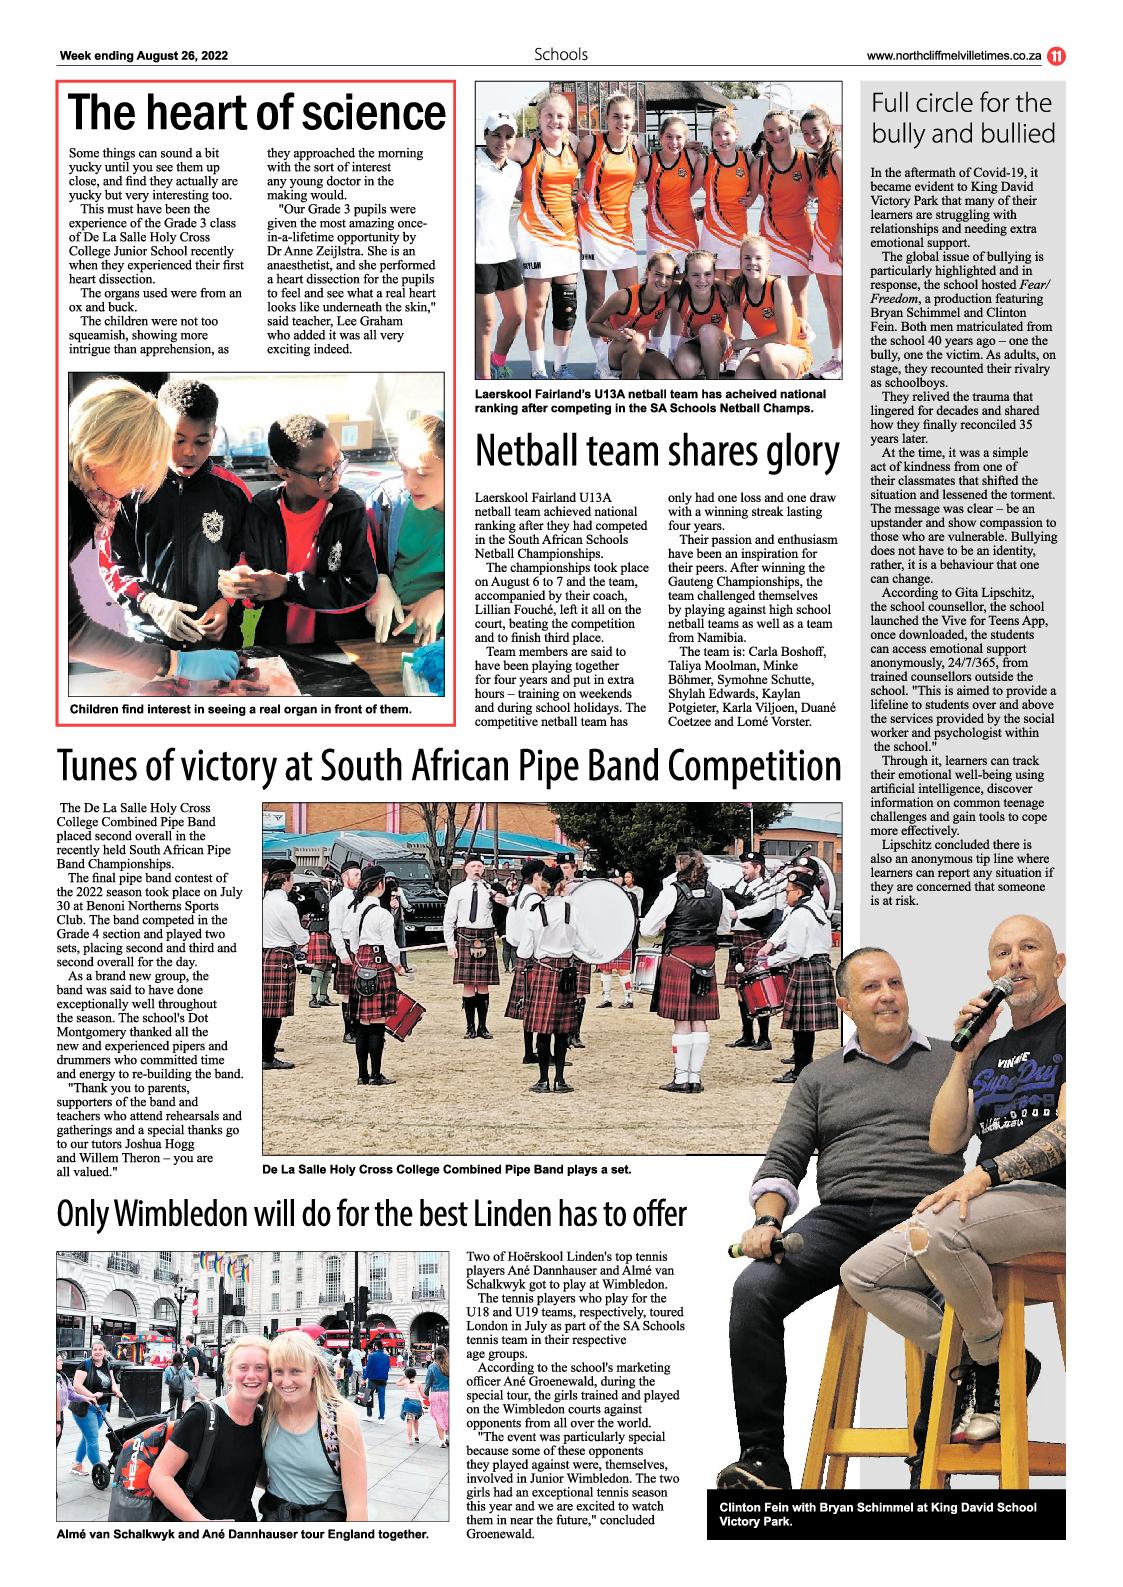 Northcliff Melville Times August 26 2022 page 11